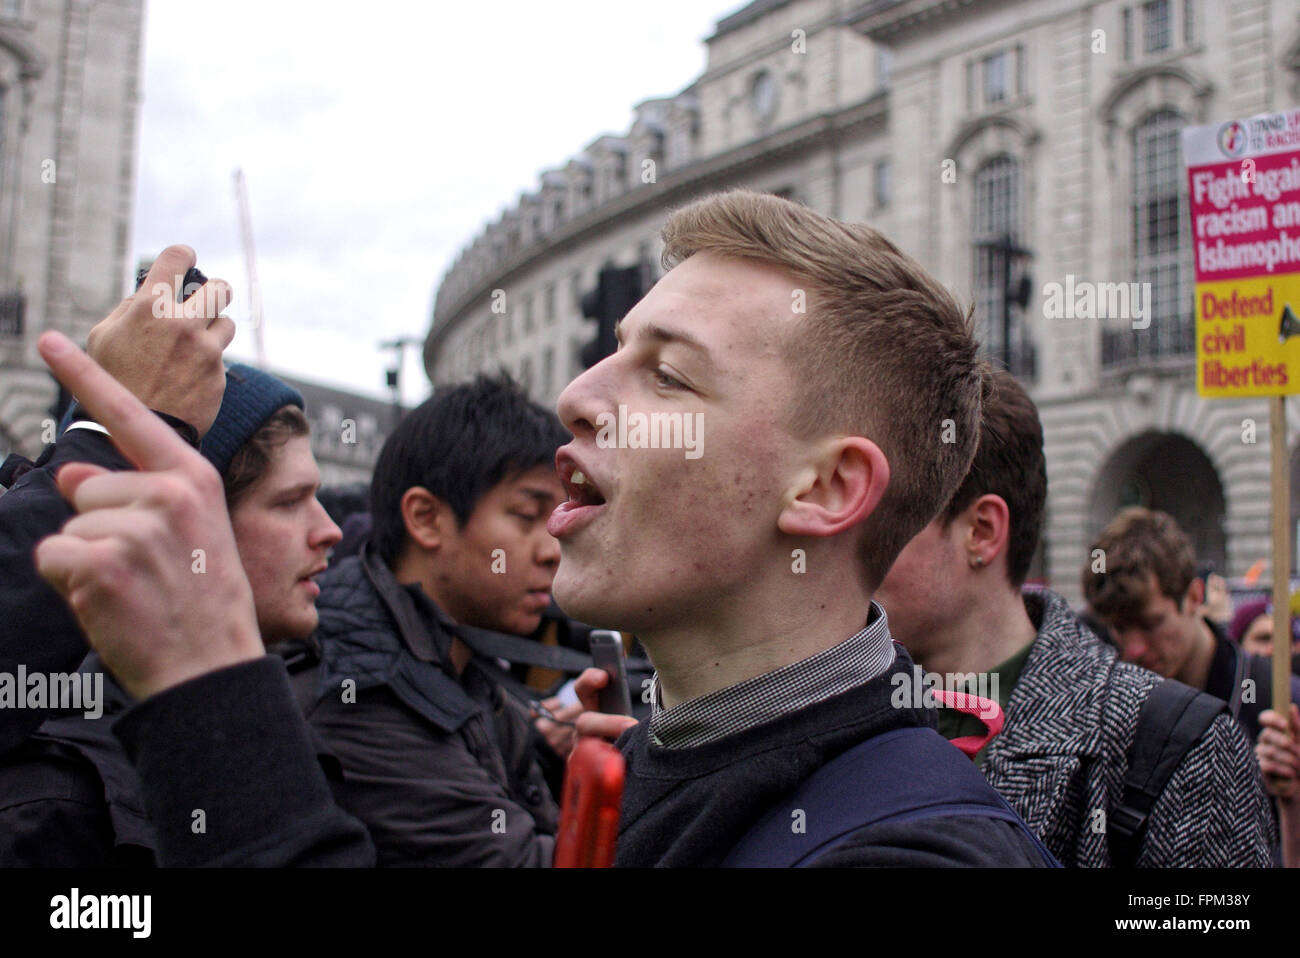 London, UK. Saturday 19th March 2016. A young antifasicist protester remonstrates with the Britain First group  at Piccadilly Circus. Stock Photo